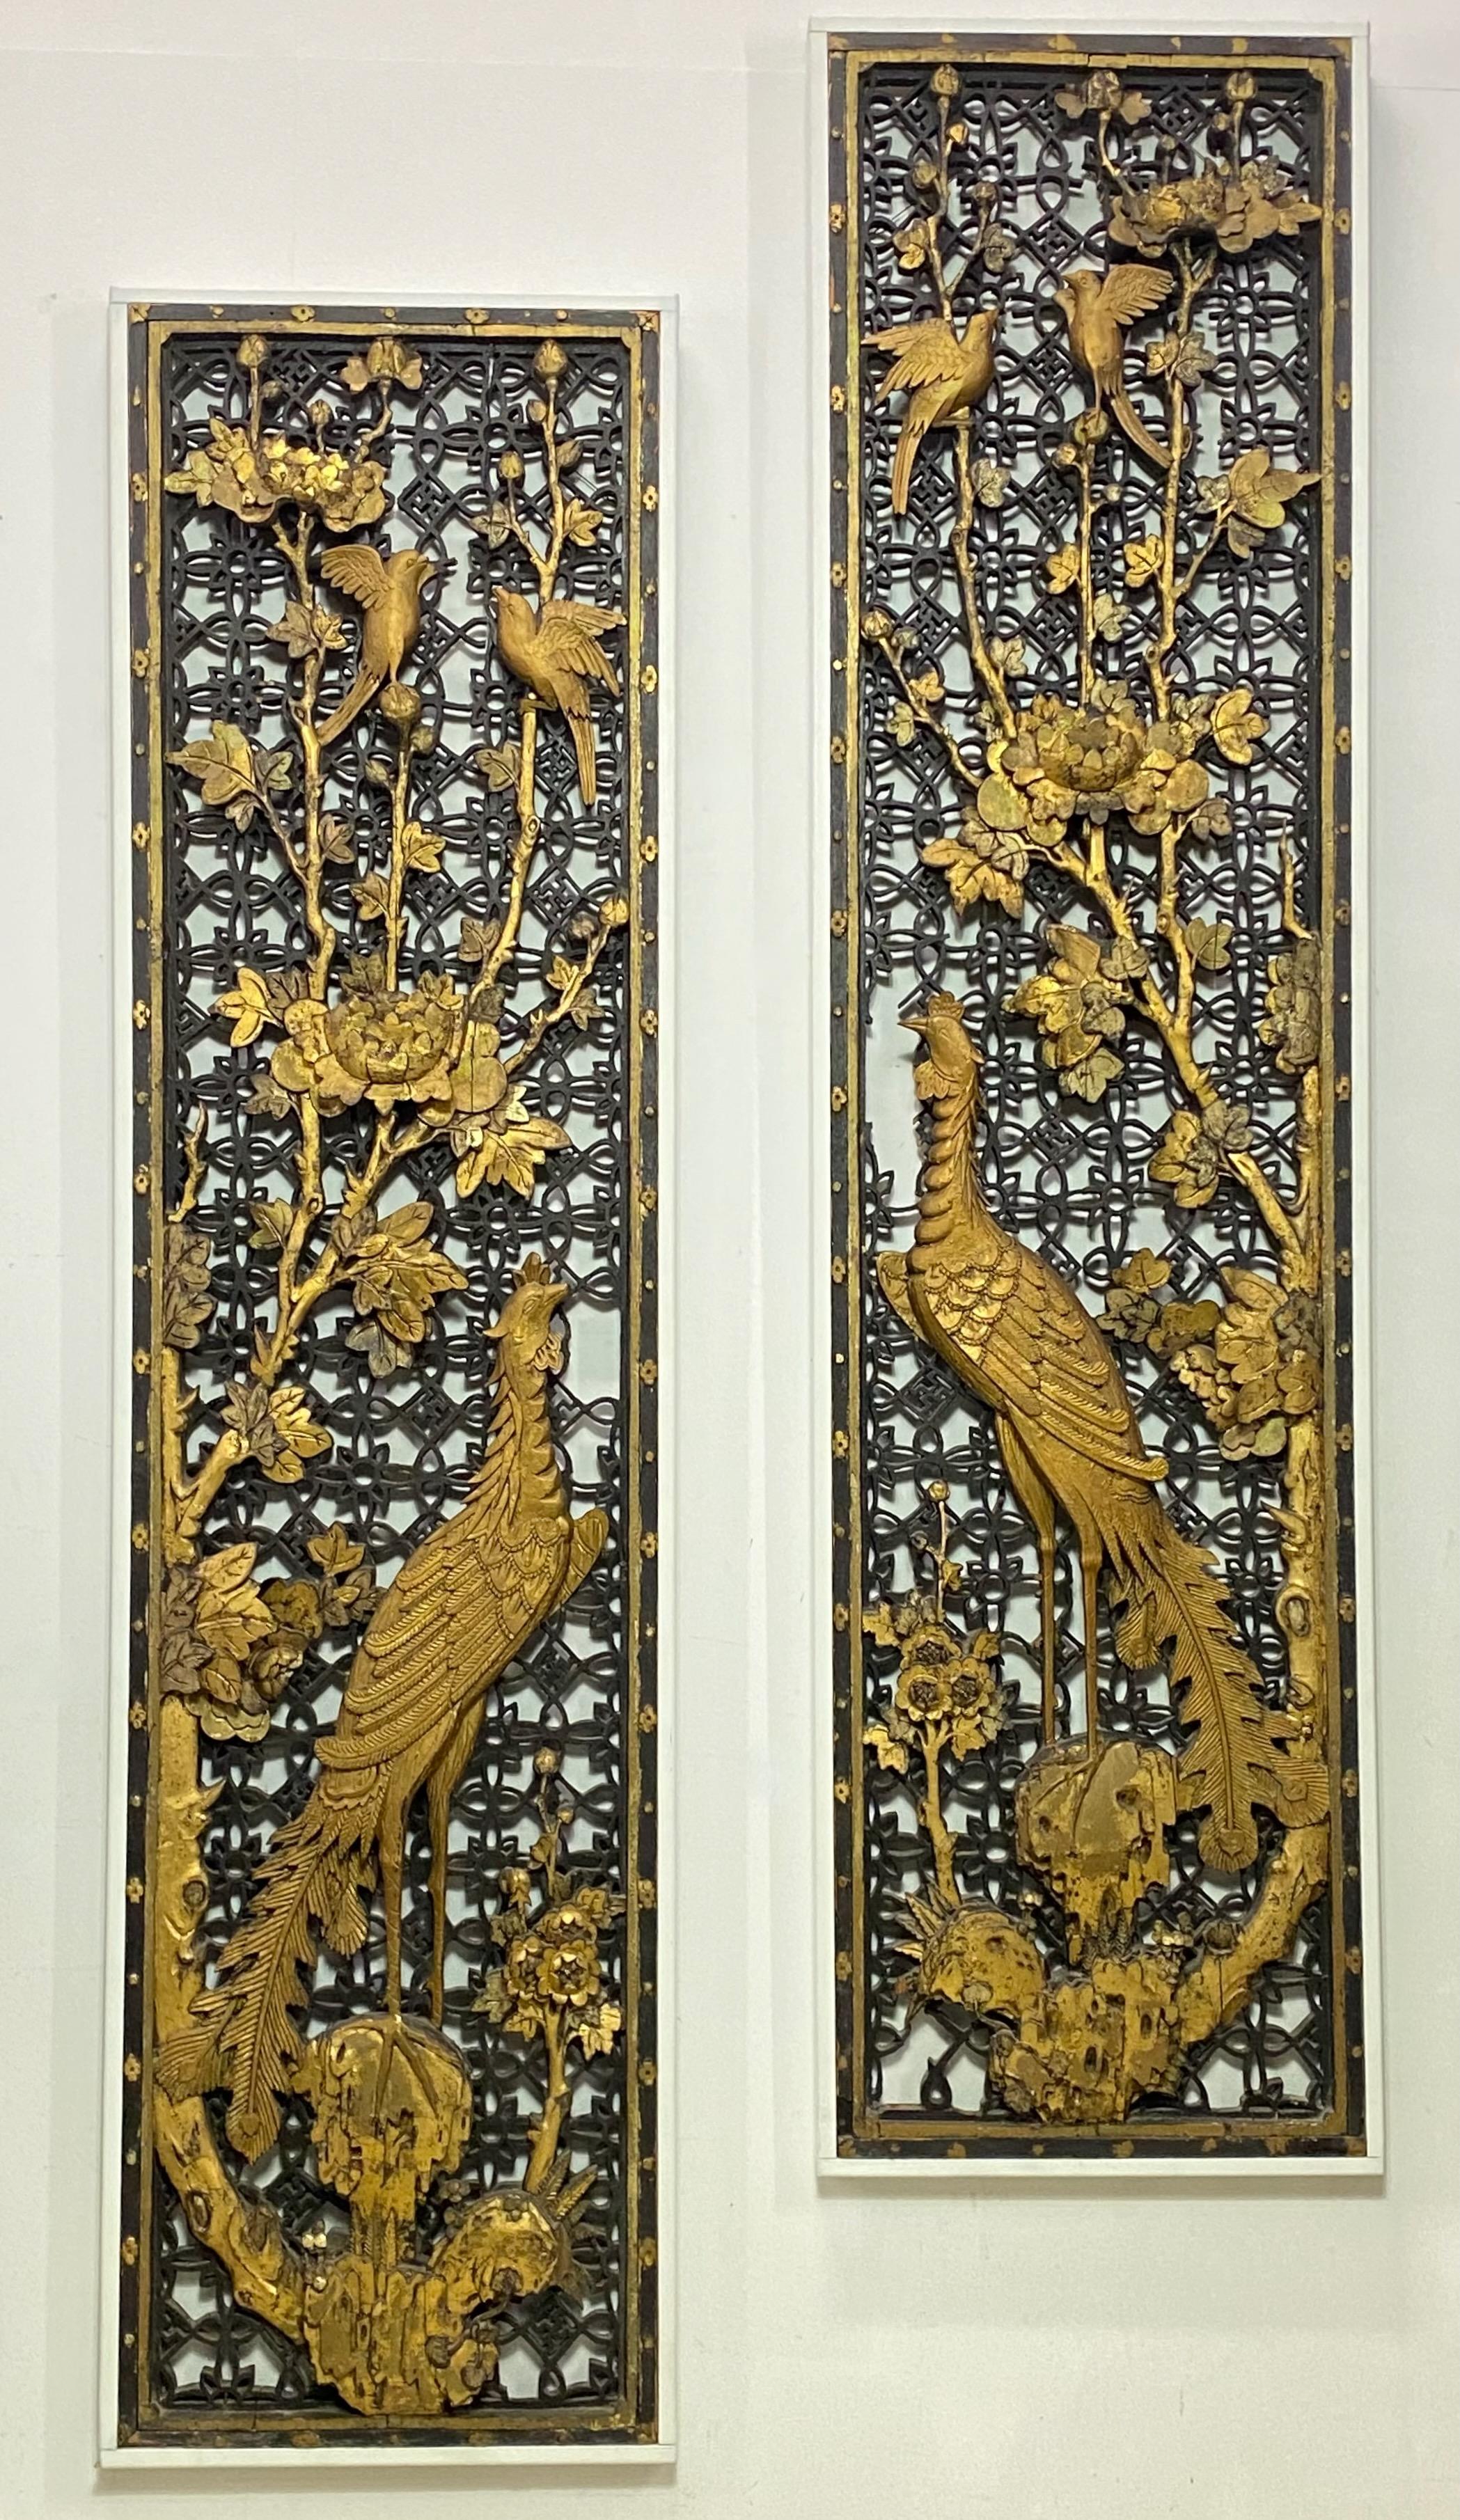 A lovely decorative pair of Chinese architectural open lattice work carved and gilt wall panels. In original antique condition with original paint, having some expected minor losses.
Mid to late 19th century.